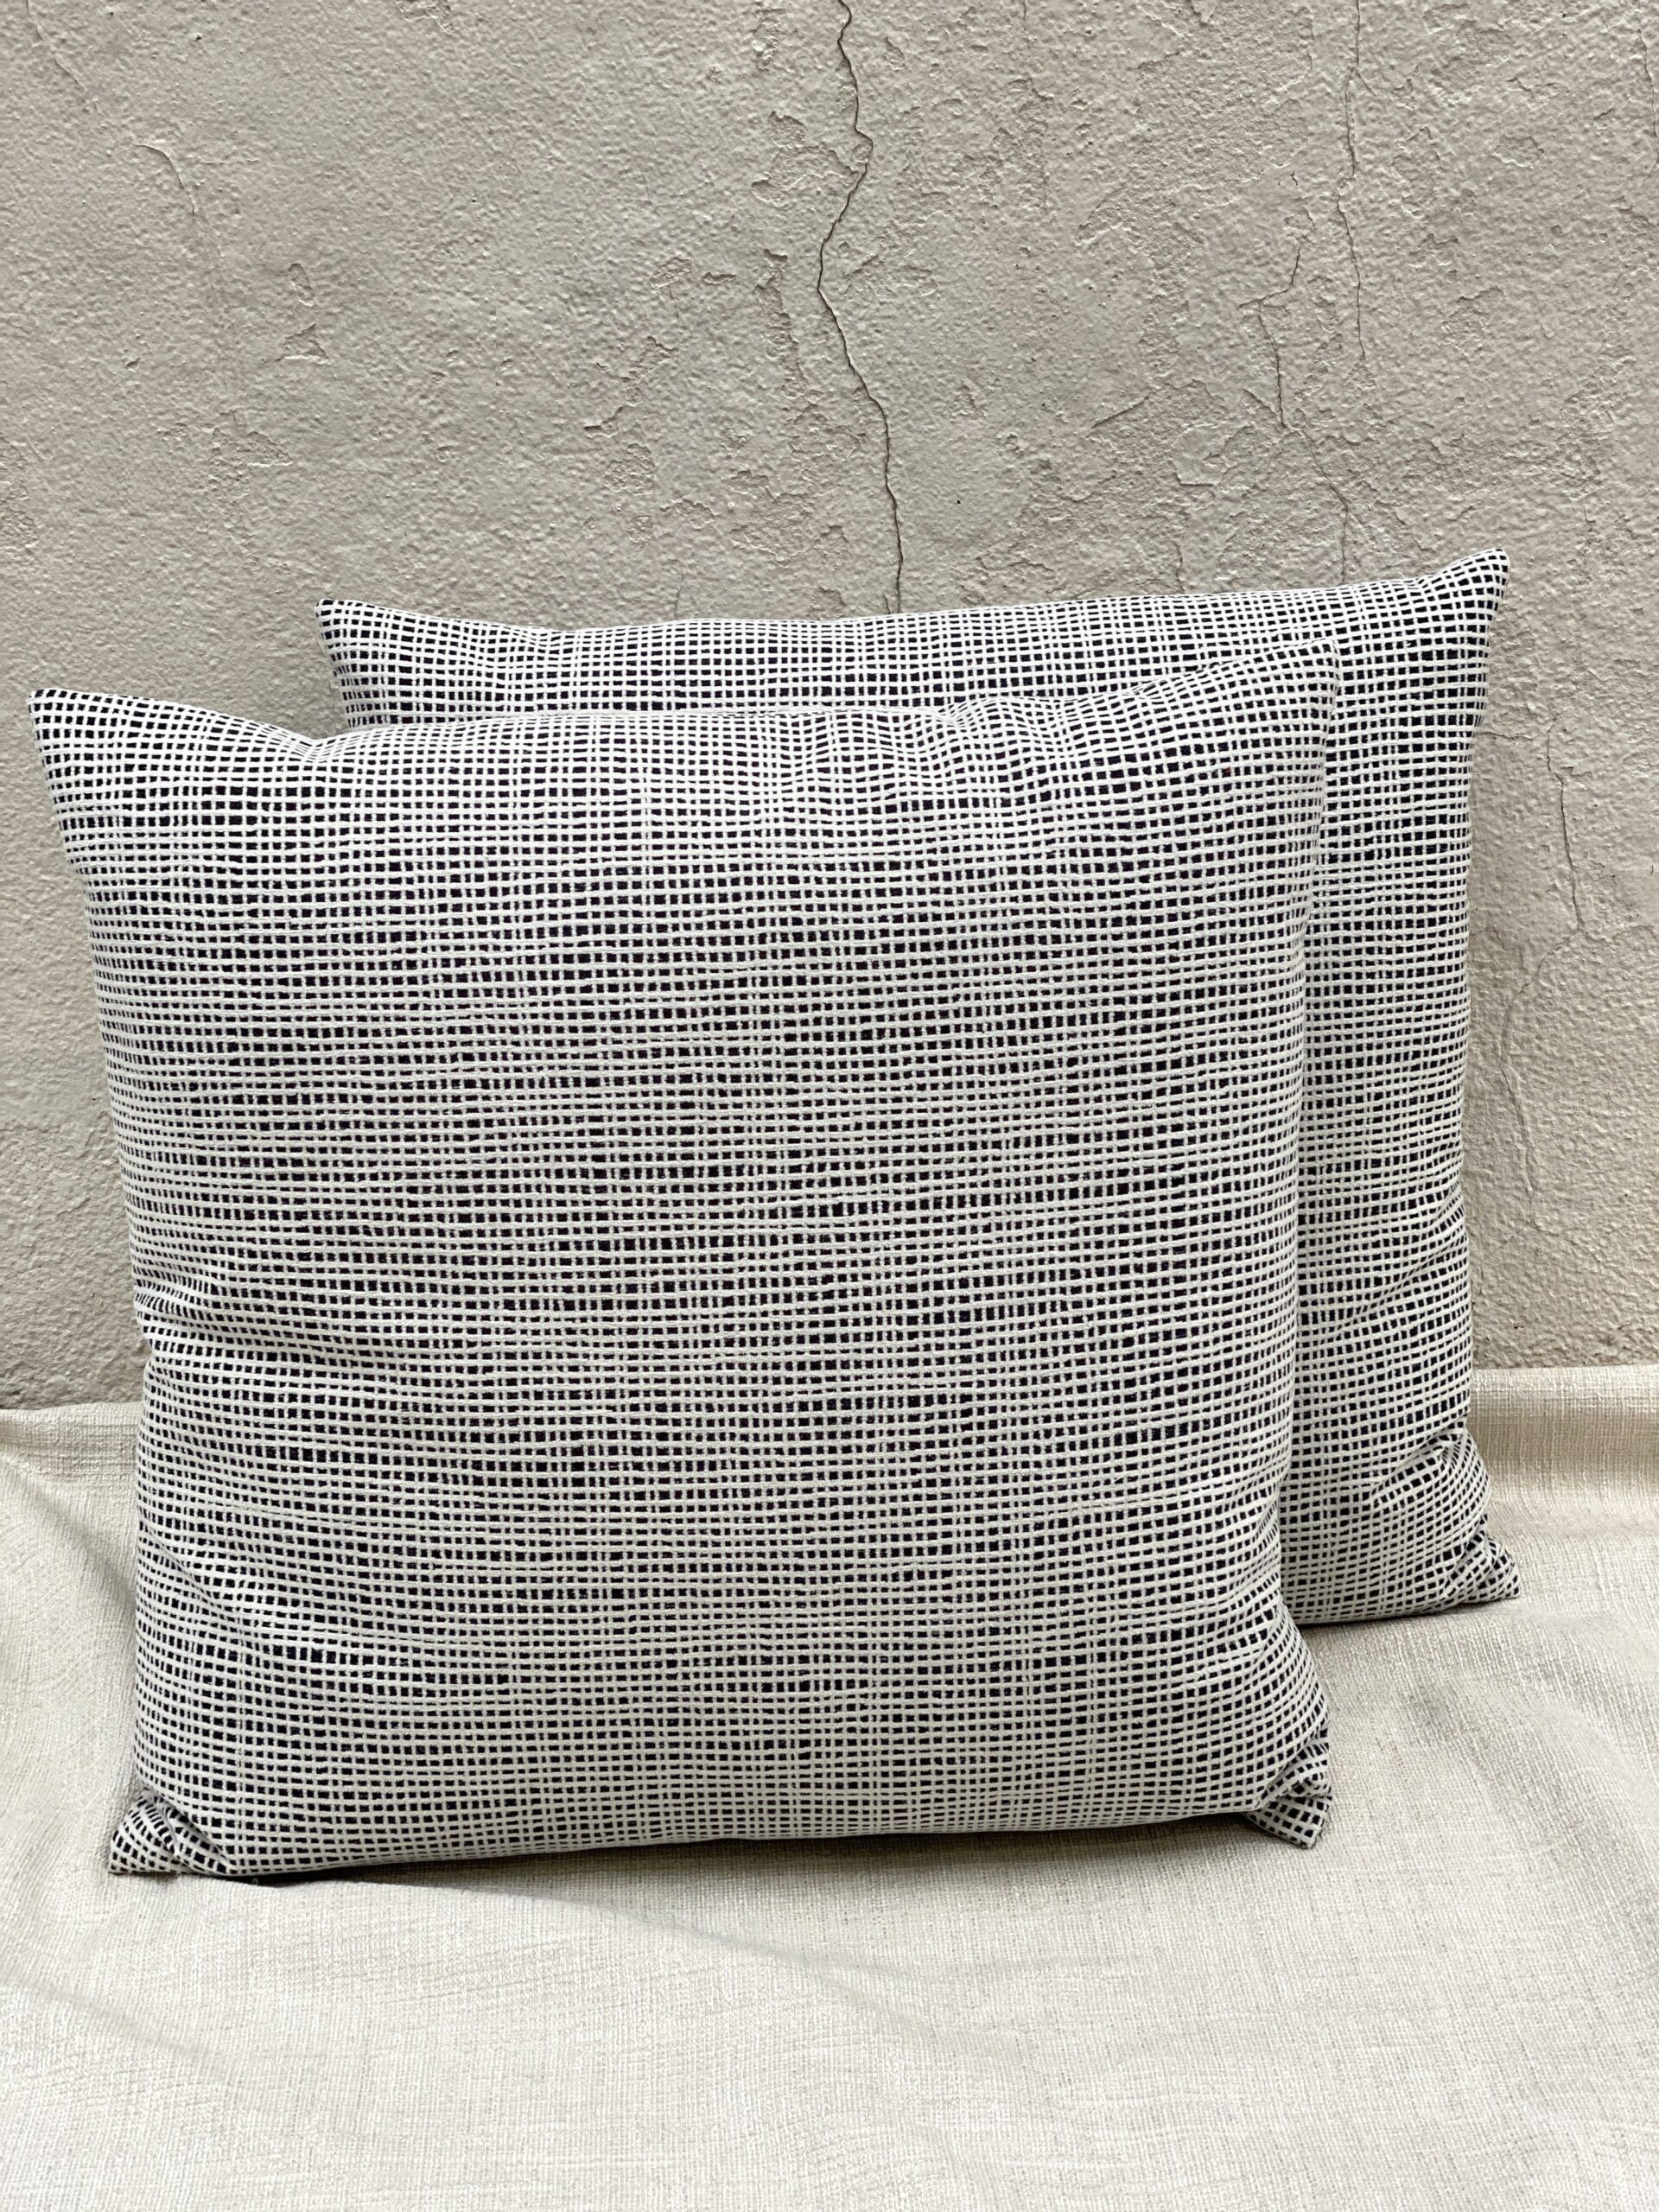 Kirkby Wire Reversible Pillows